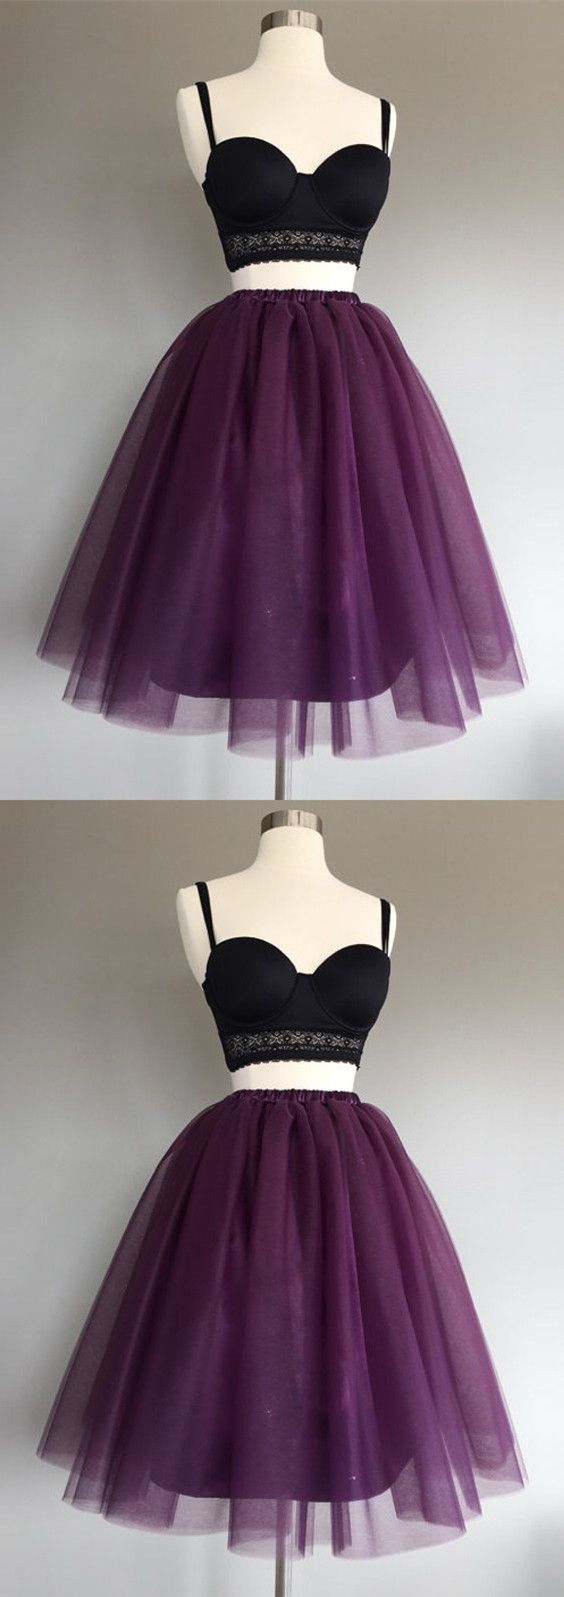 Hochzeit - Two Piece A-Line Spaghetti Straps Grape Tulle Short Homecoming Dress